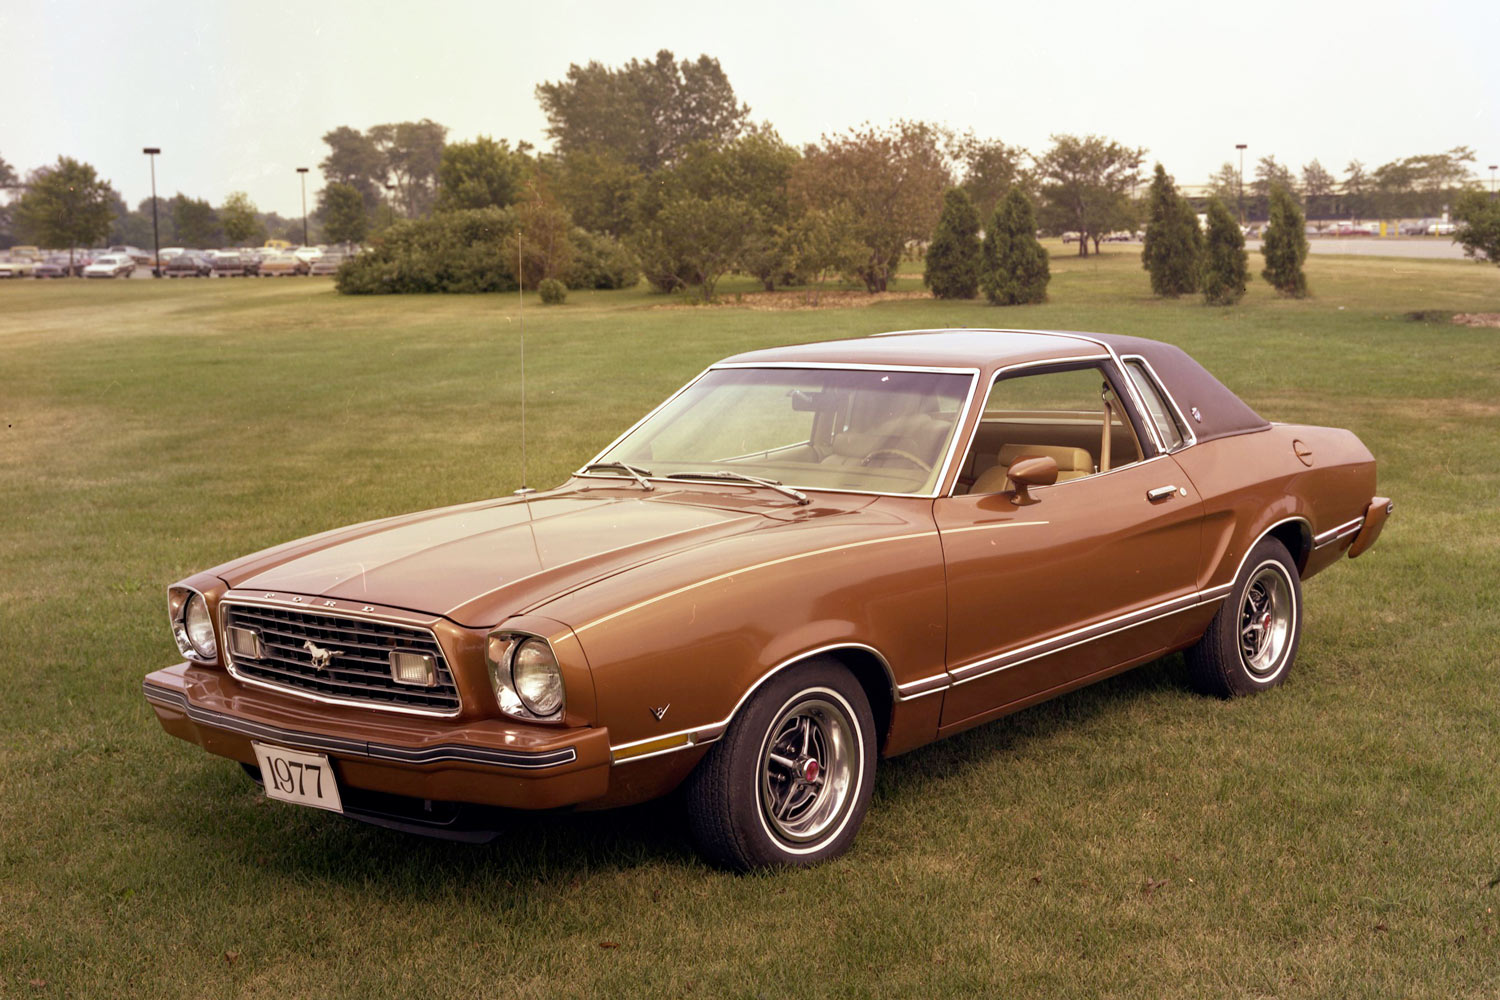 1977 Ford Mustang II in orange on lawn, vintage photograph